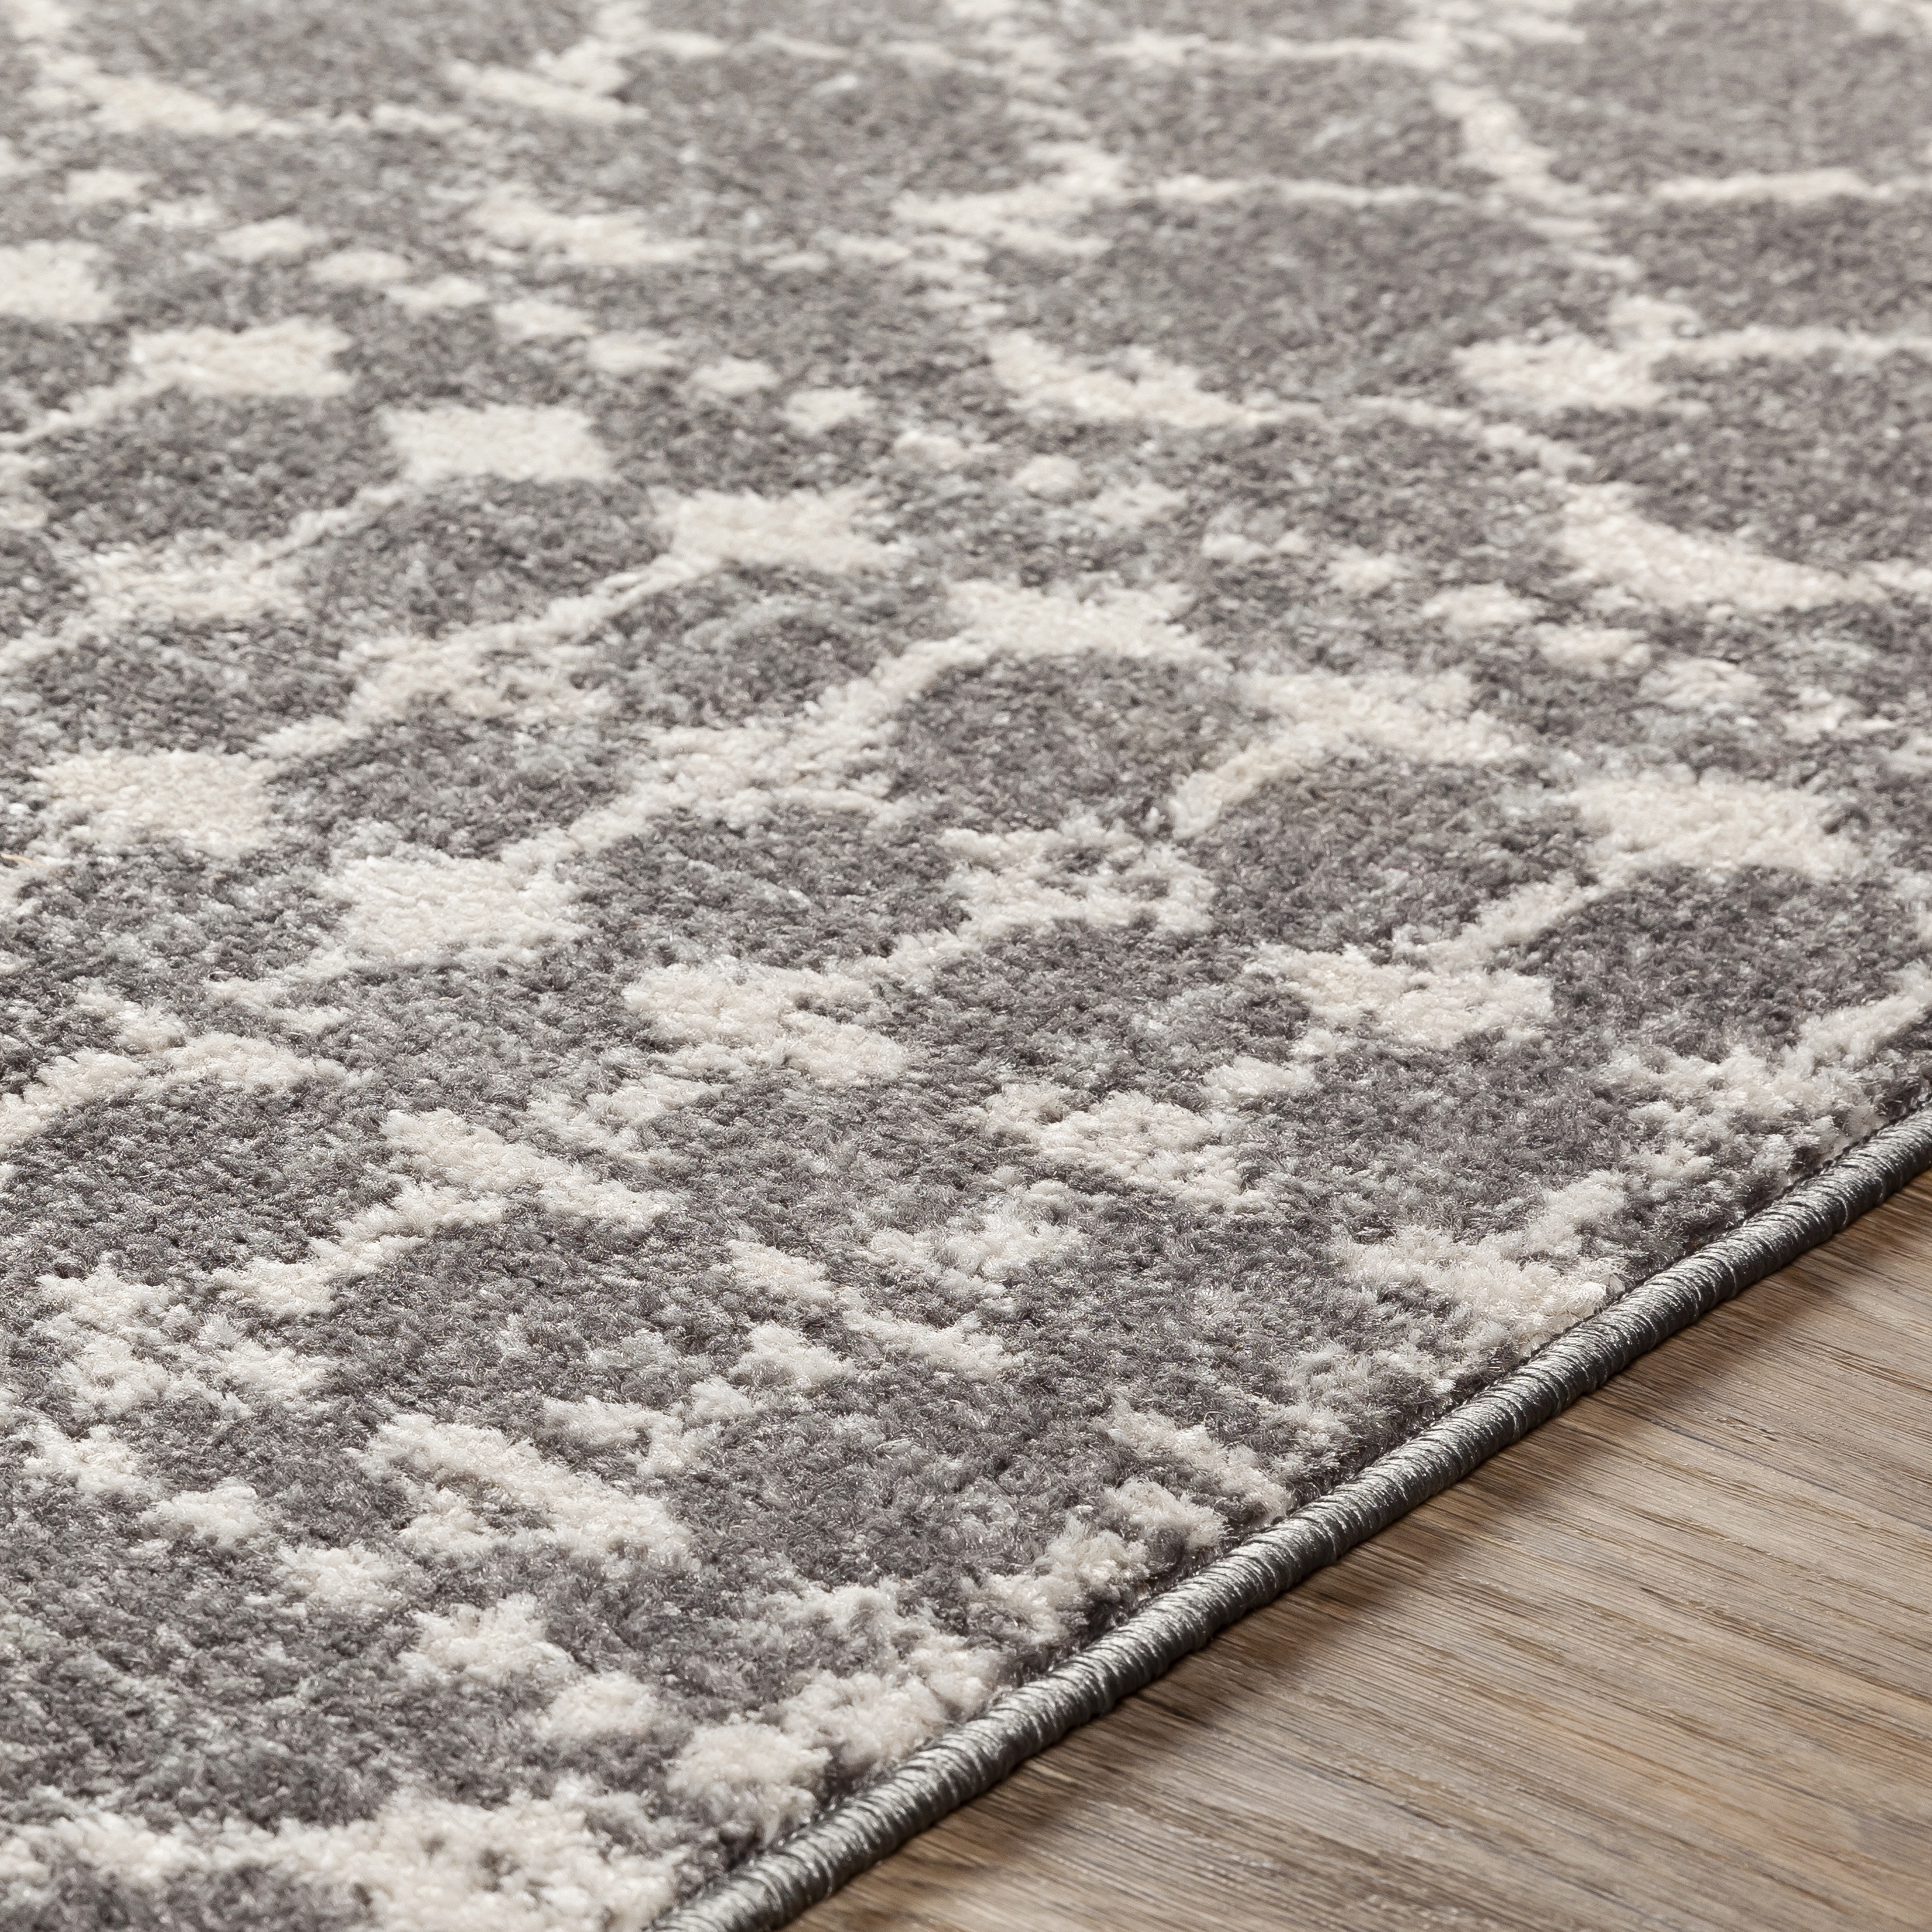 Chester Rug, 7'10" x 10'3" - Image 3